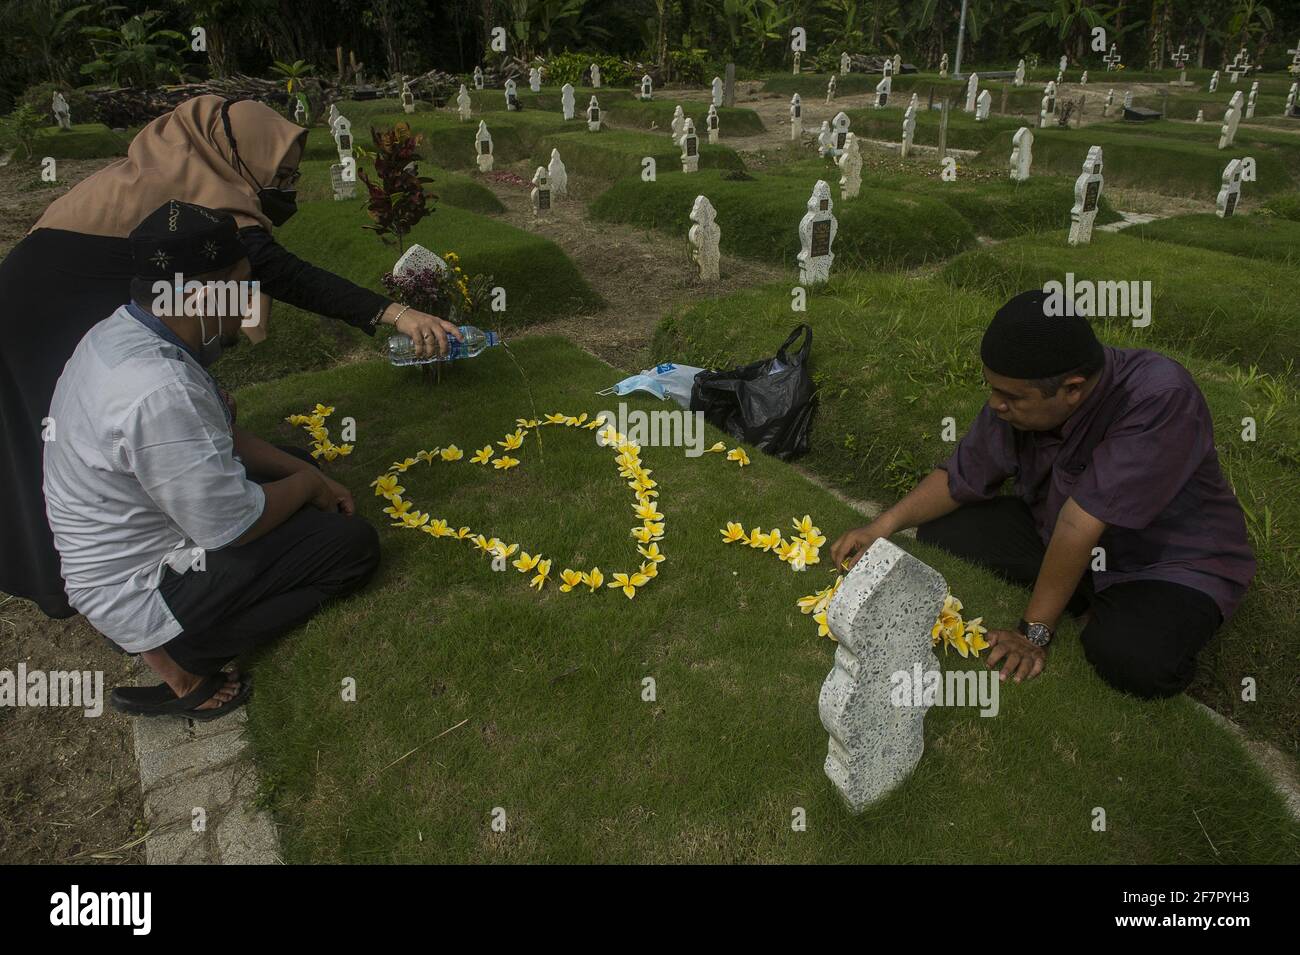 Medan, Indonesia. 09th Apr, 2021. Hanafi's family seen carrying out the tradition of a funeral pilgrimage to welcome the holy month of Ramadan 1442H at specifict cemetery for coronavirus pandemic victims in Medan, Indonesia on April 9, 2021. Hanafi admitted to being sad and traumatized were remembering 9 months ago moment, when his wife died due coronavirus disease-19 in the same time with Eid Al-Fitr 2020. Photo by Sutanta Aditya/ABACAPRESS.COM Credit: Abaca Press/Alamy Live News Stock Photo